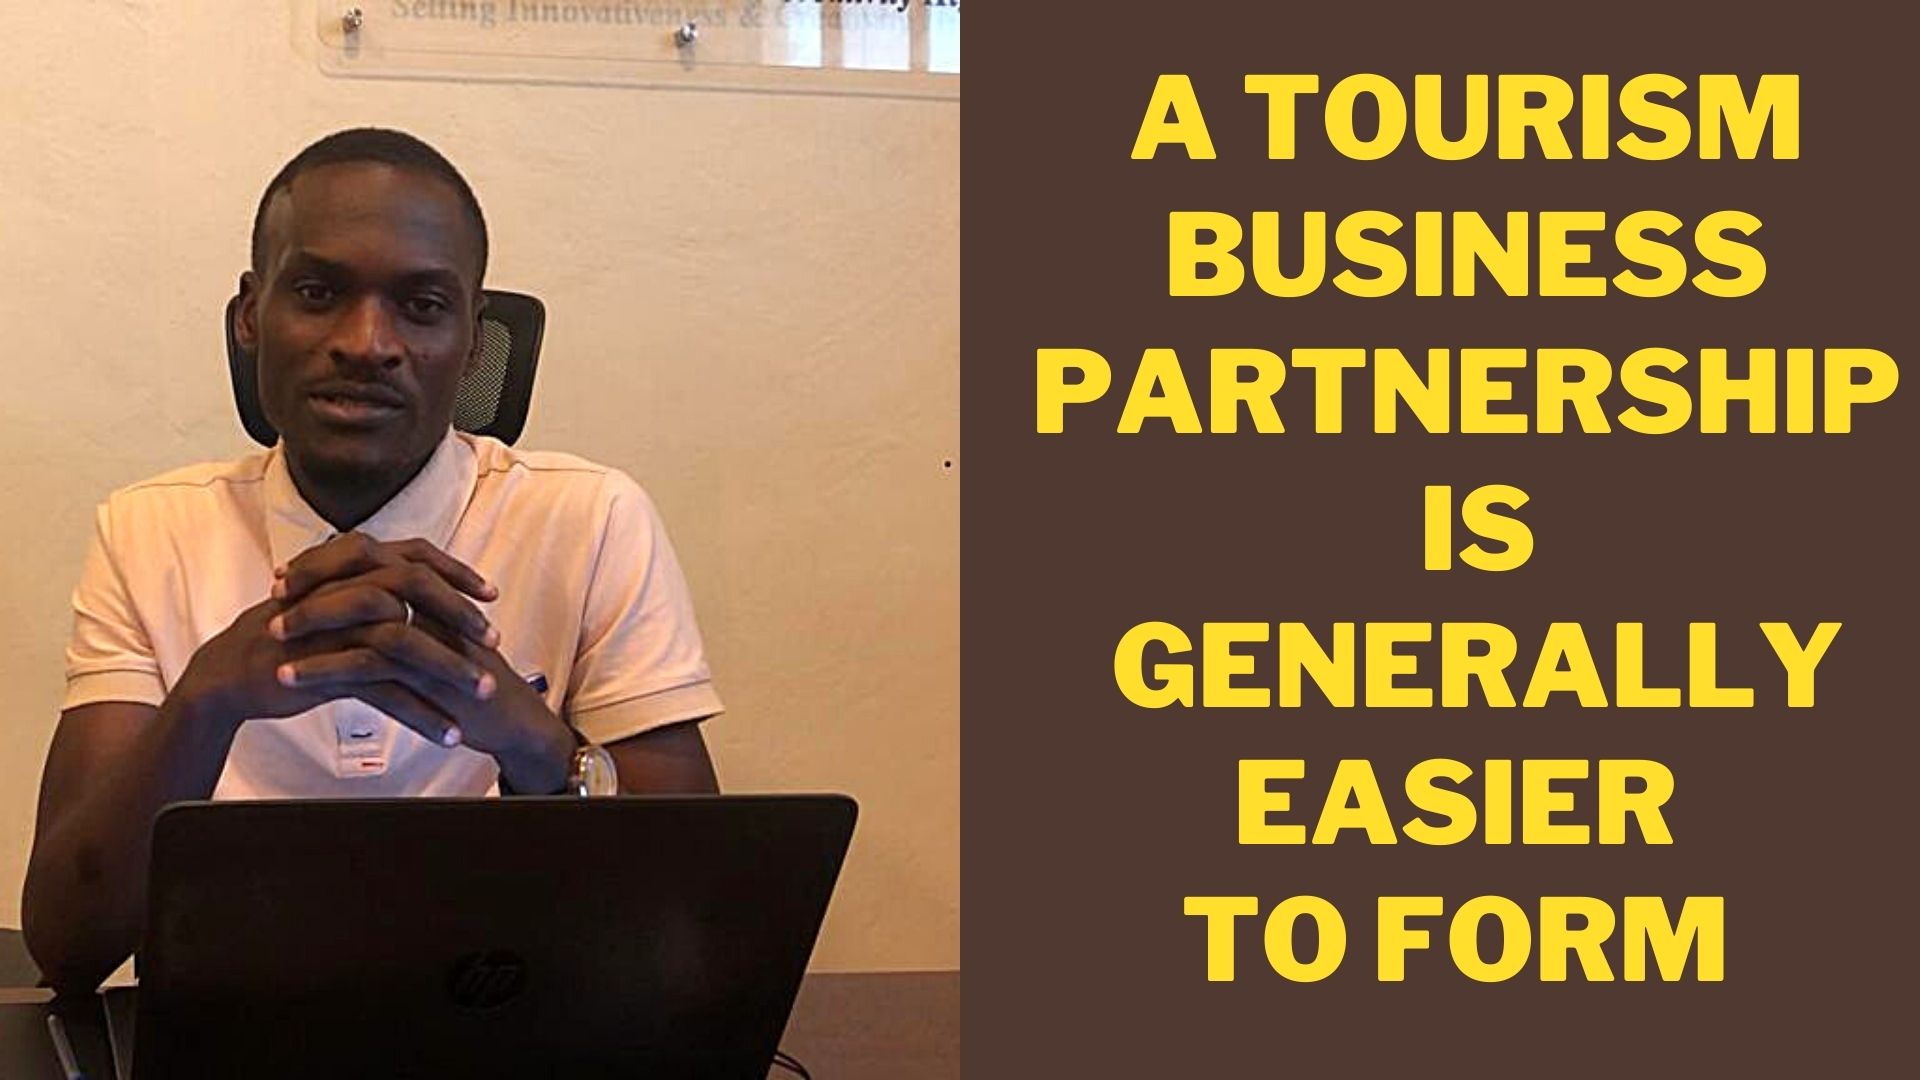 Partnership In Tourism Business